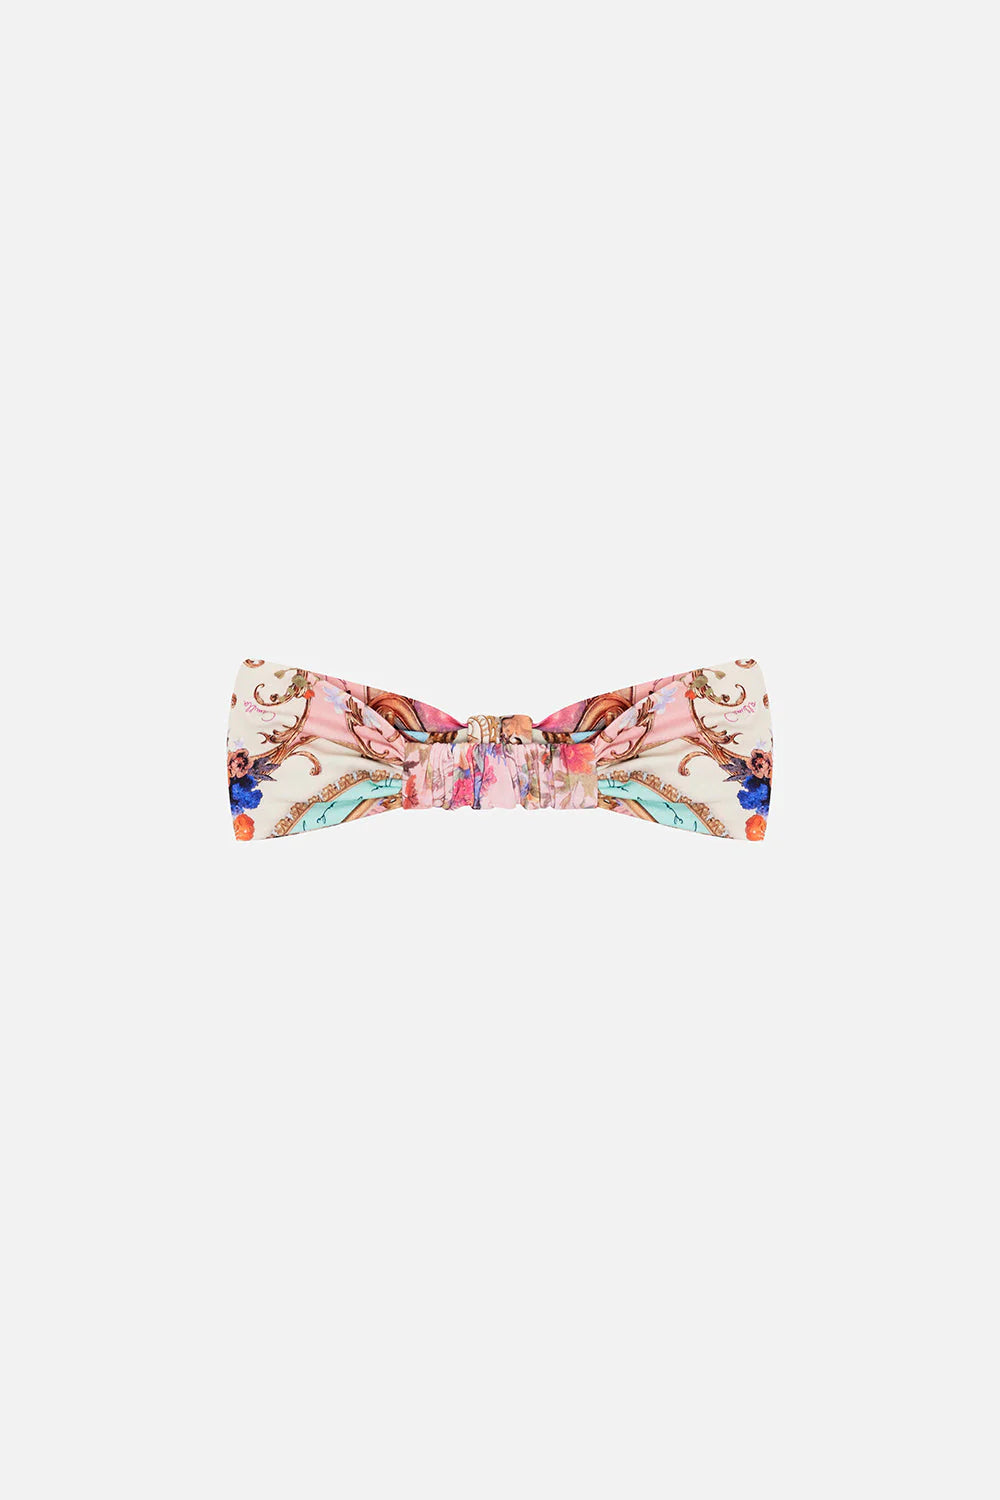 Camilla Letters From The Pink Room Kids Knot Headband